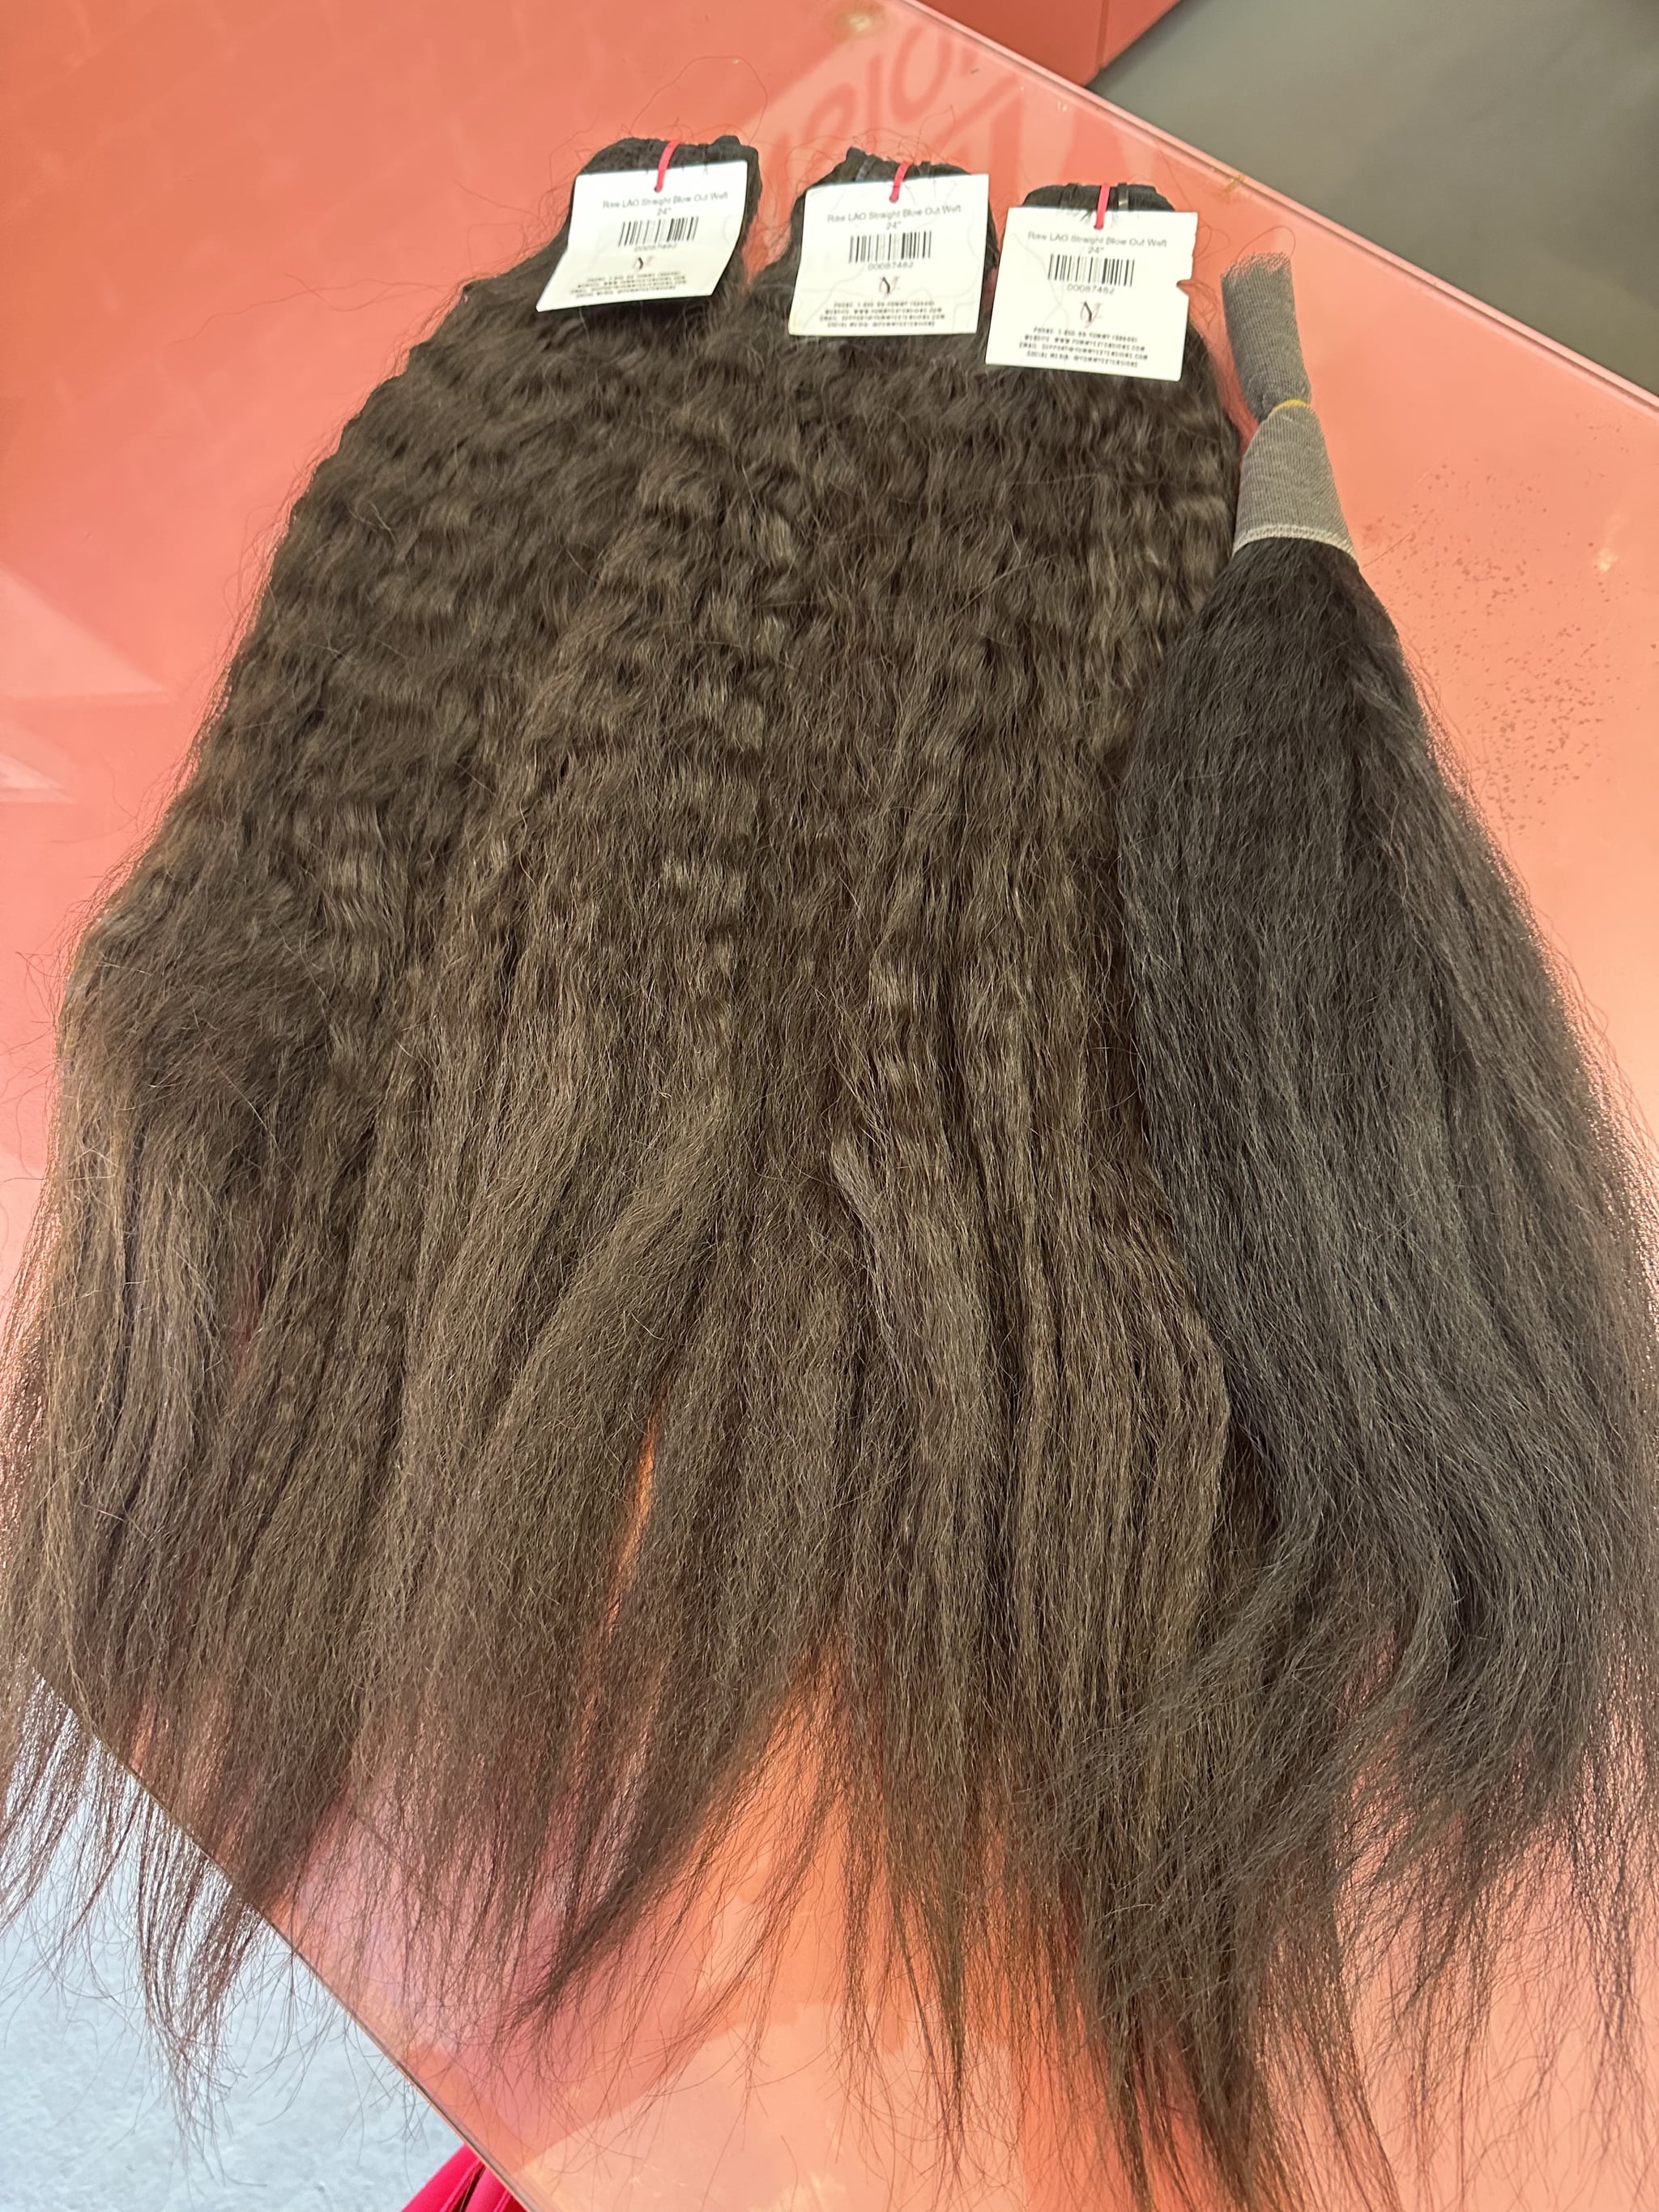 The Yummy Raw Lao Straight Blowout Weft bundles and closure.